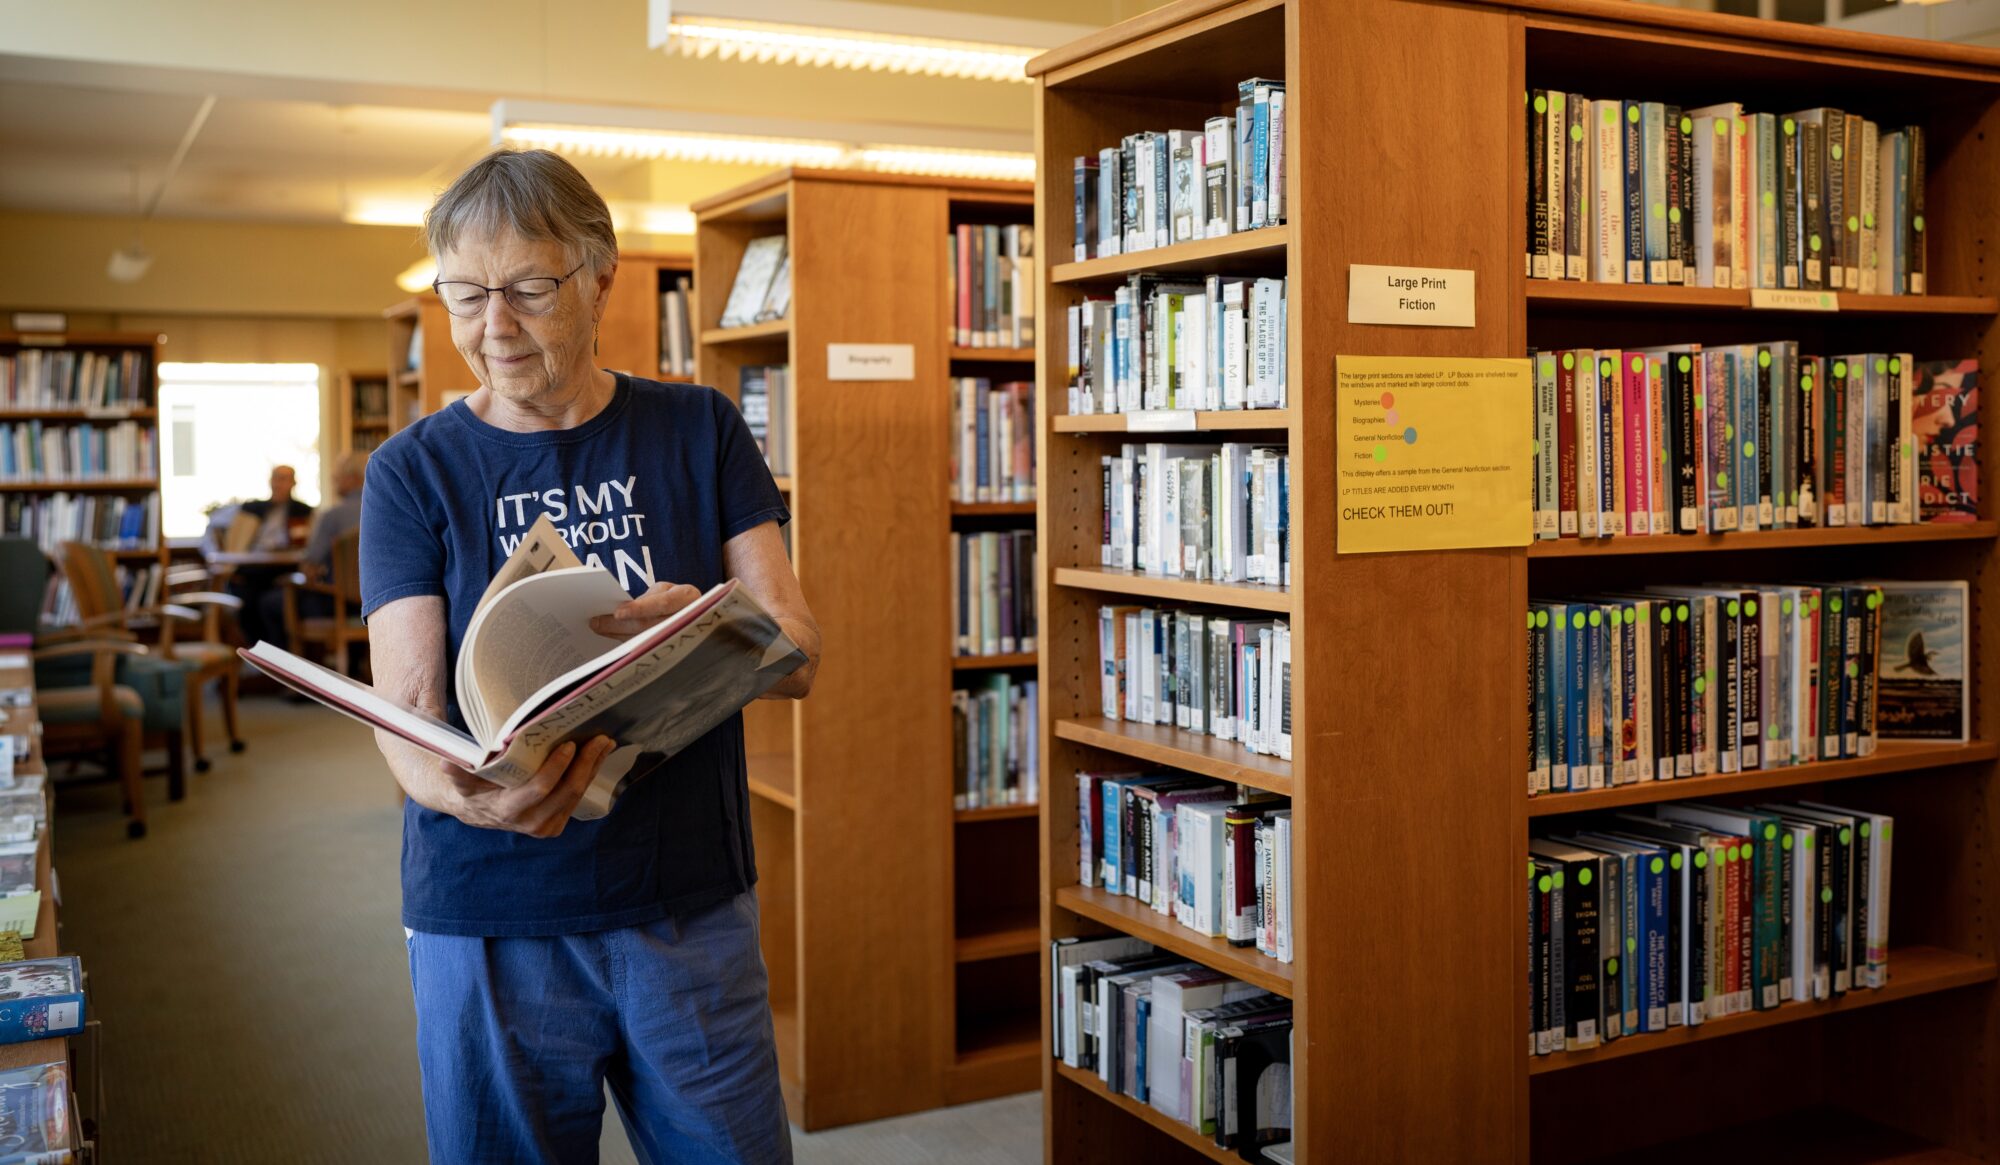 Woman looking at a book in a library.